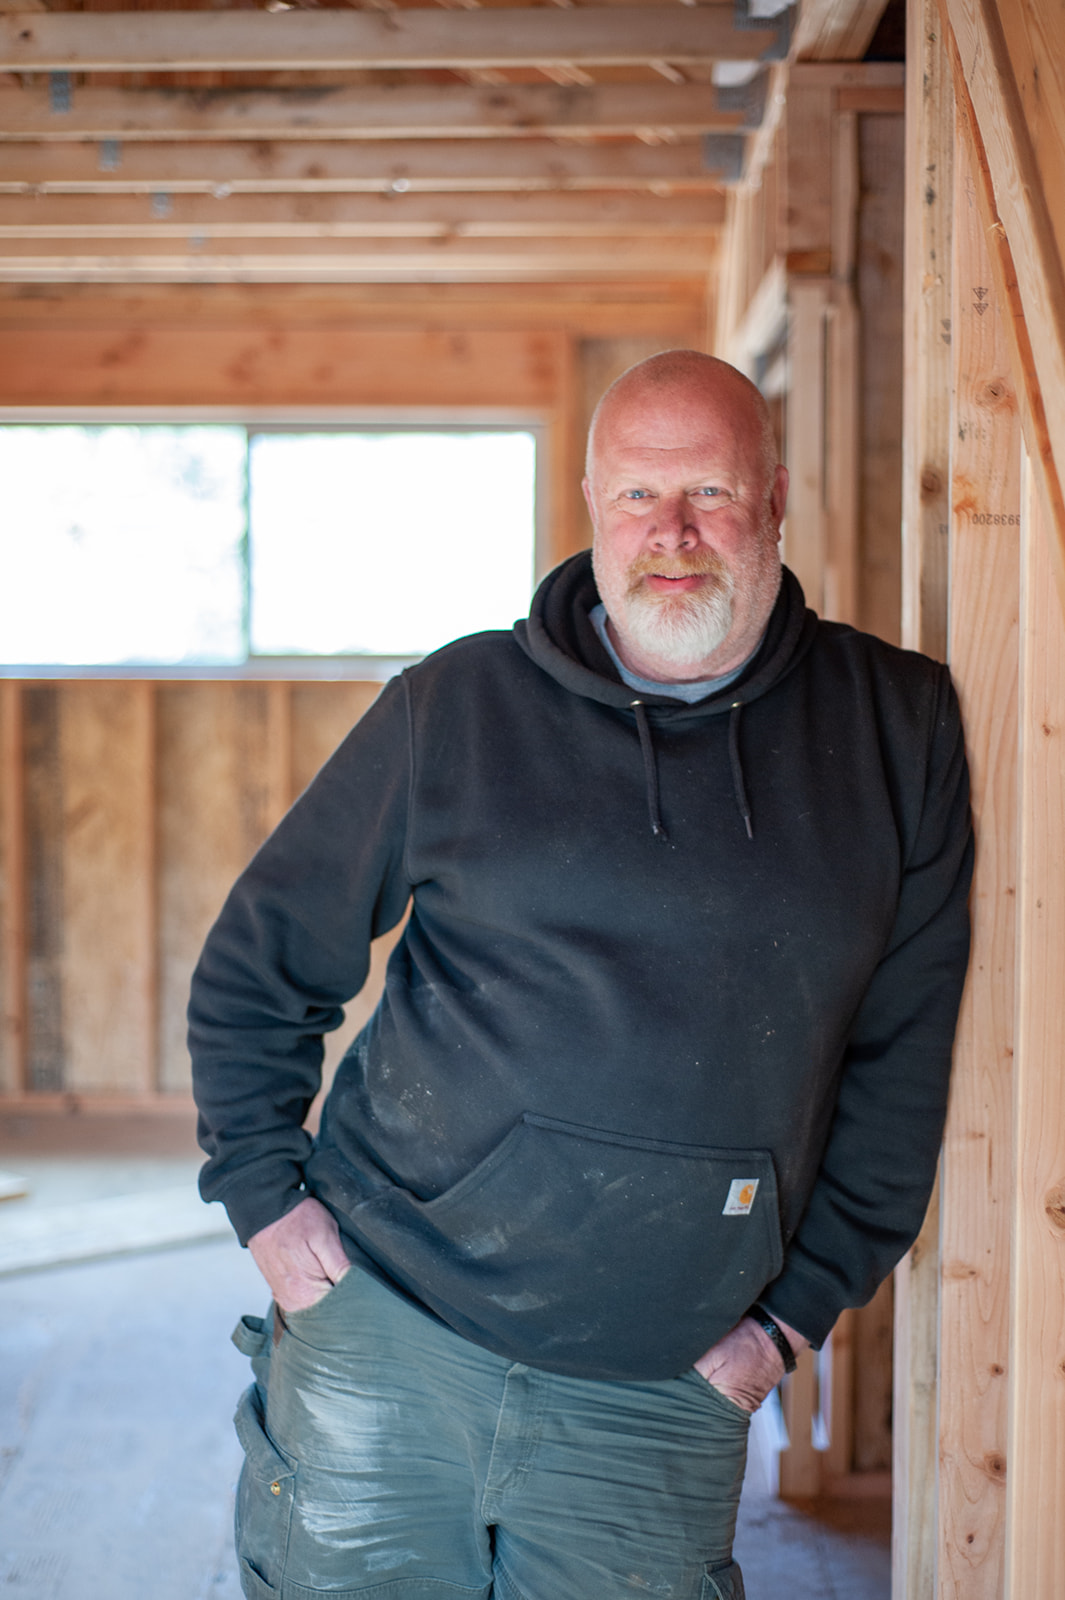 A man in a hoodie standing in a room with wood framing.